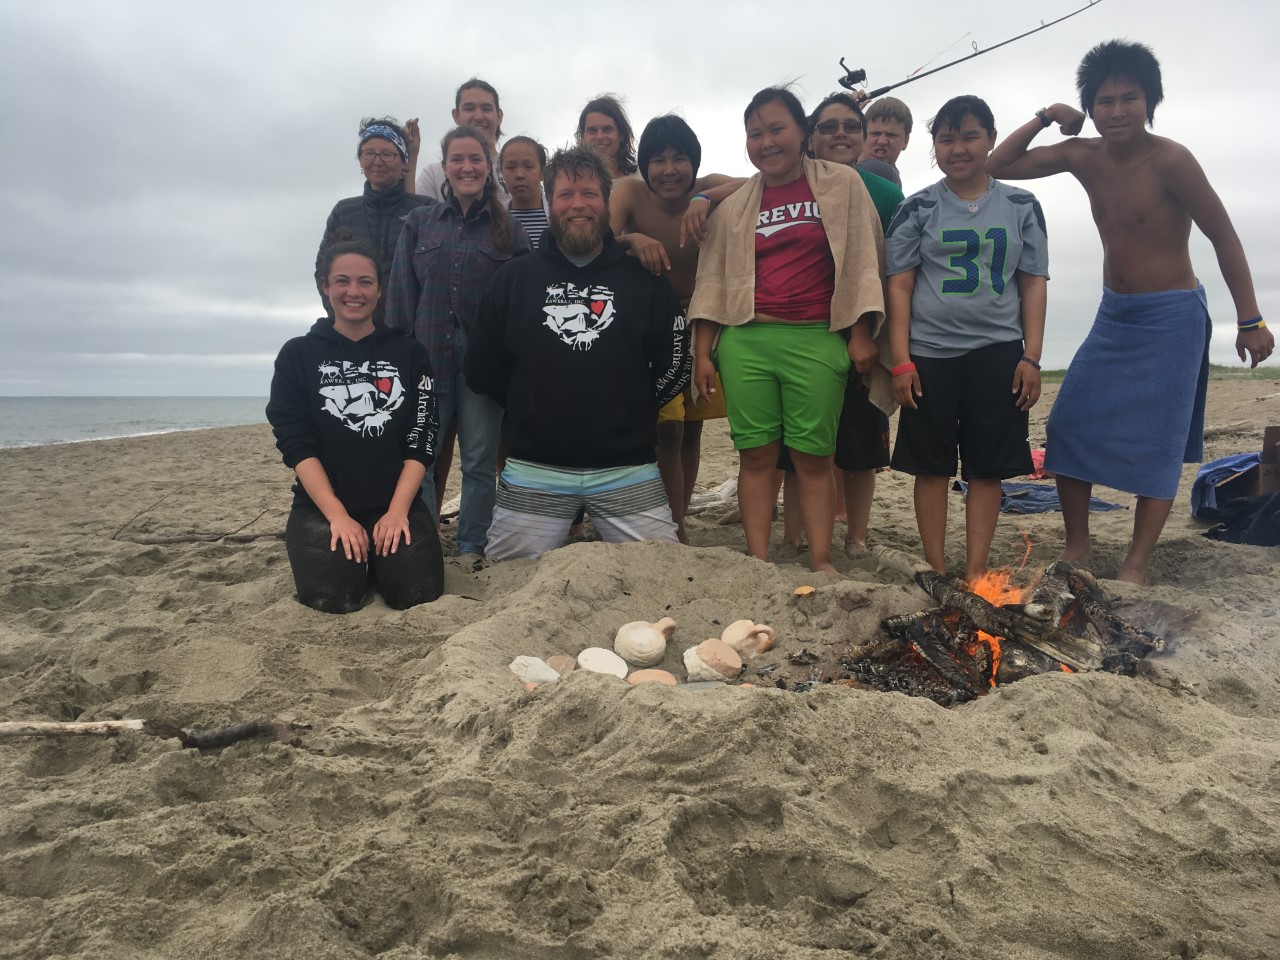 A group of adults and kids smile for a photograph on the beach with a fire in view.